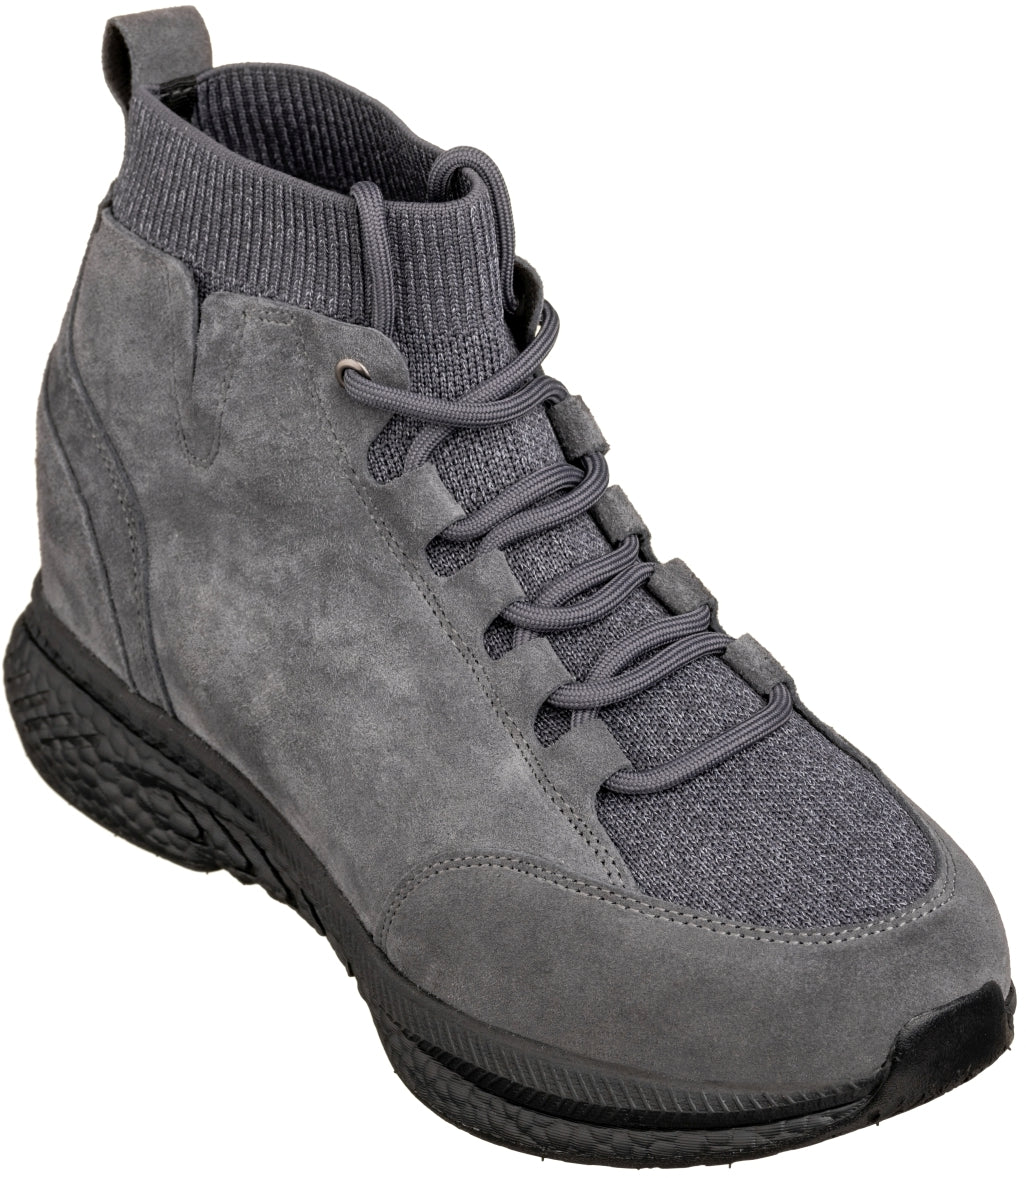 Elevator shoes height increase CALTO - S23202 - 3 Inches Taller (Grey) - Sneakers